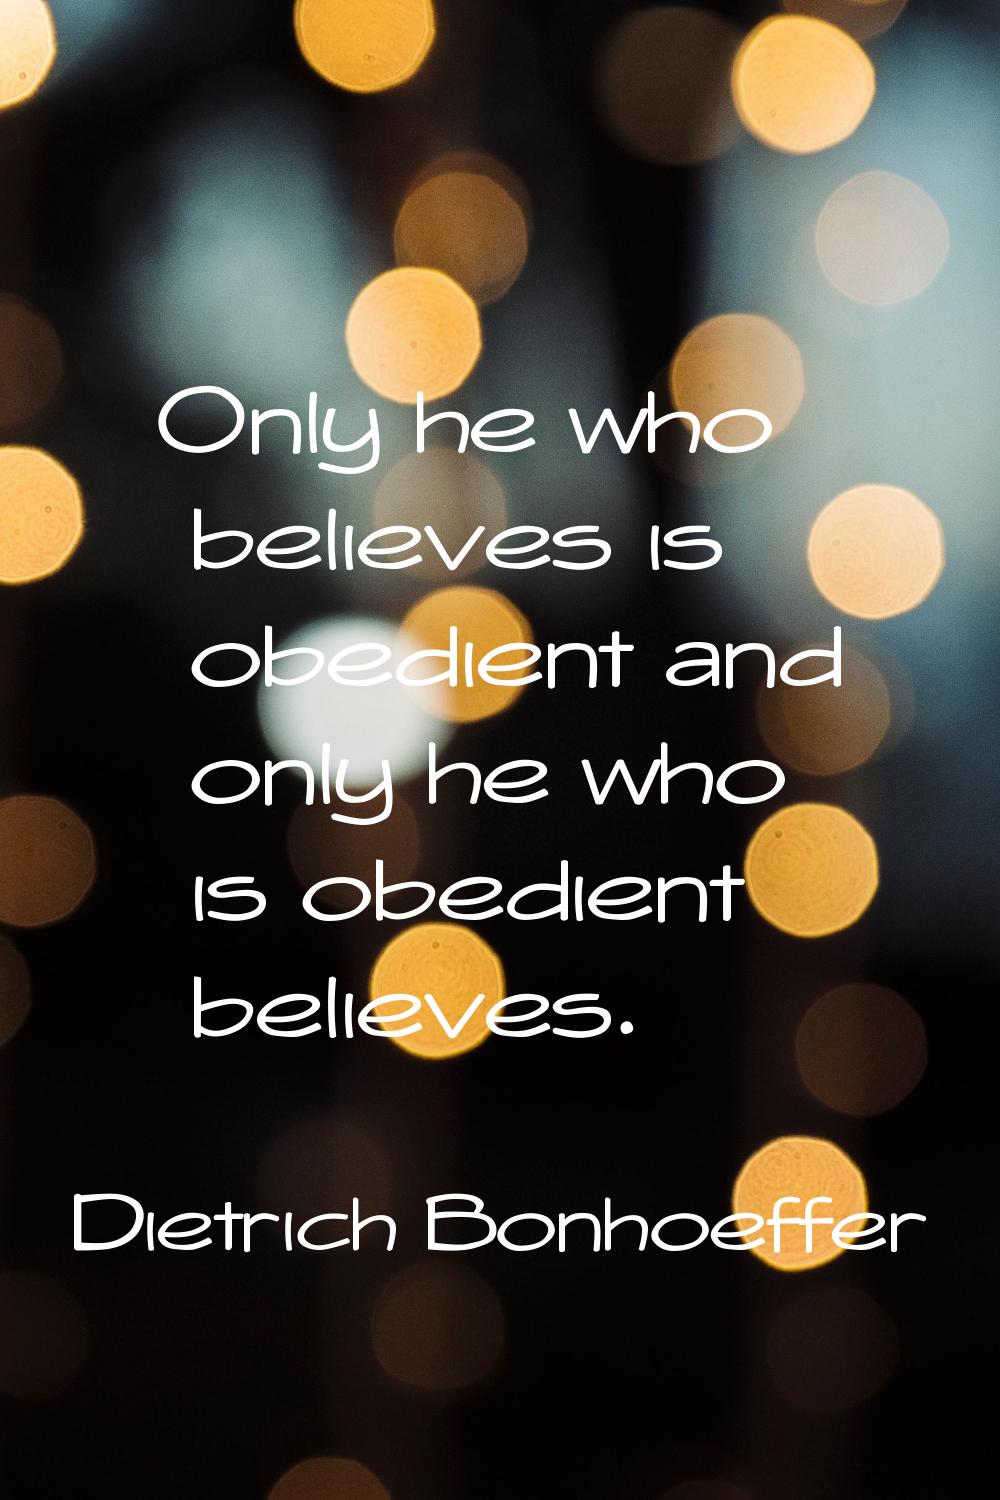 Only he who believes is obedient and only he who is obedient believes.